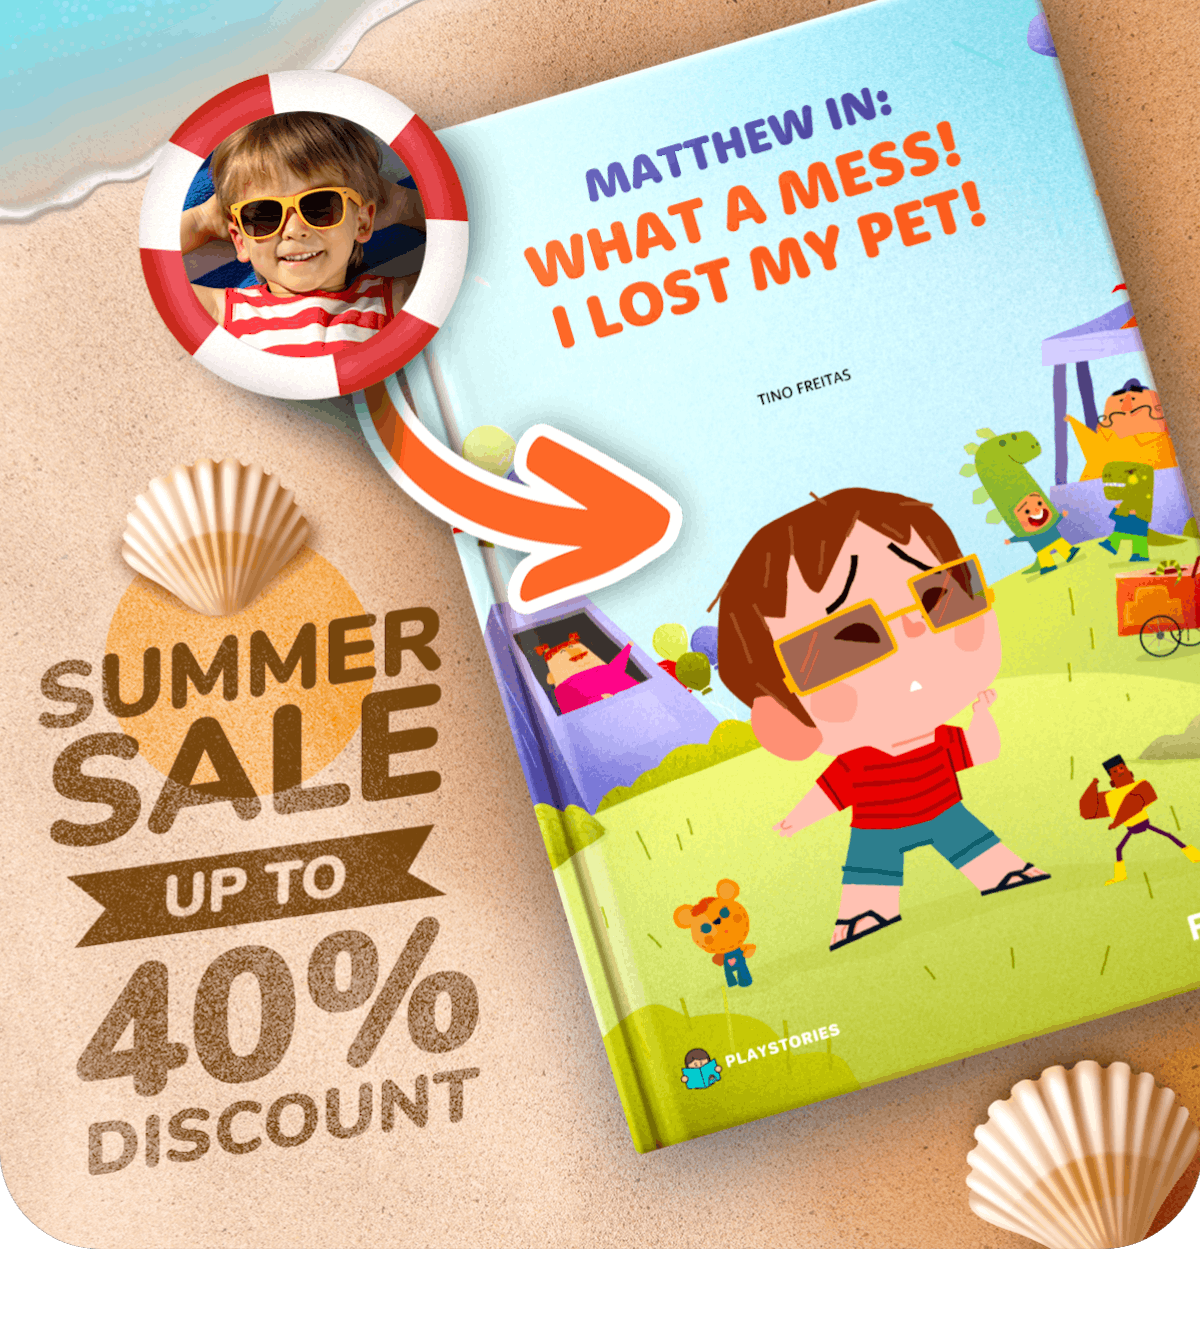 Summer Sale Get Up To 40% Off - Playstories